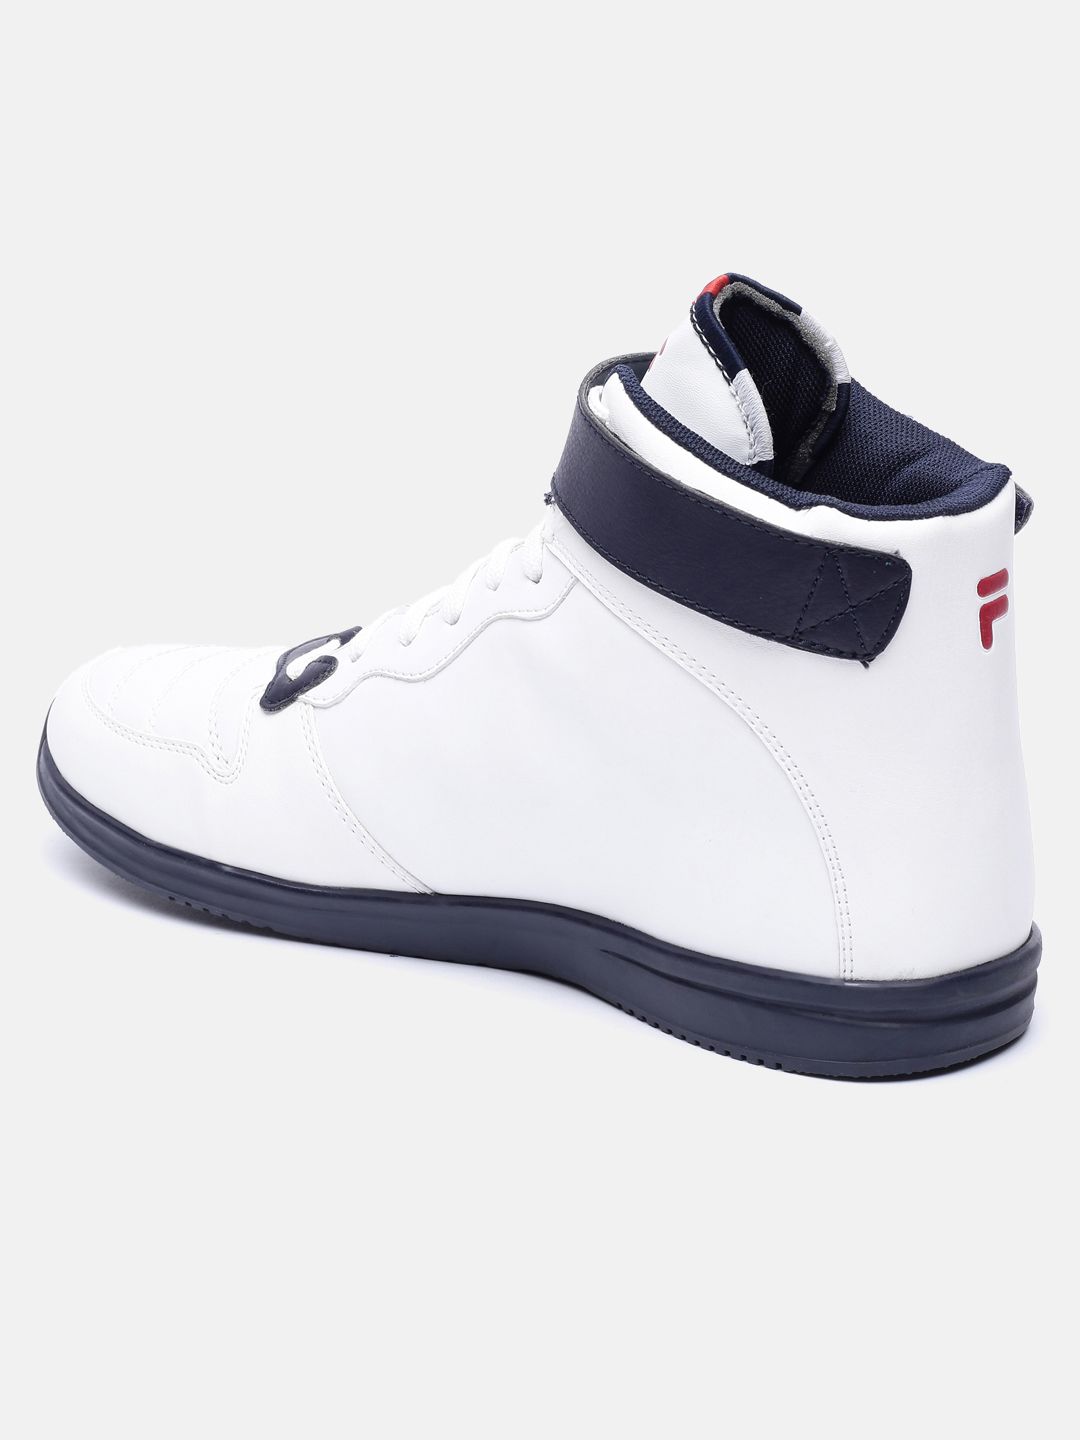 RODOX All White Colorblocked - White Men's Sneakers - Buy RODOX All White  Colorblocked - White Men's Sneakers Online at Best Prices in India on  Snapdeal